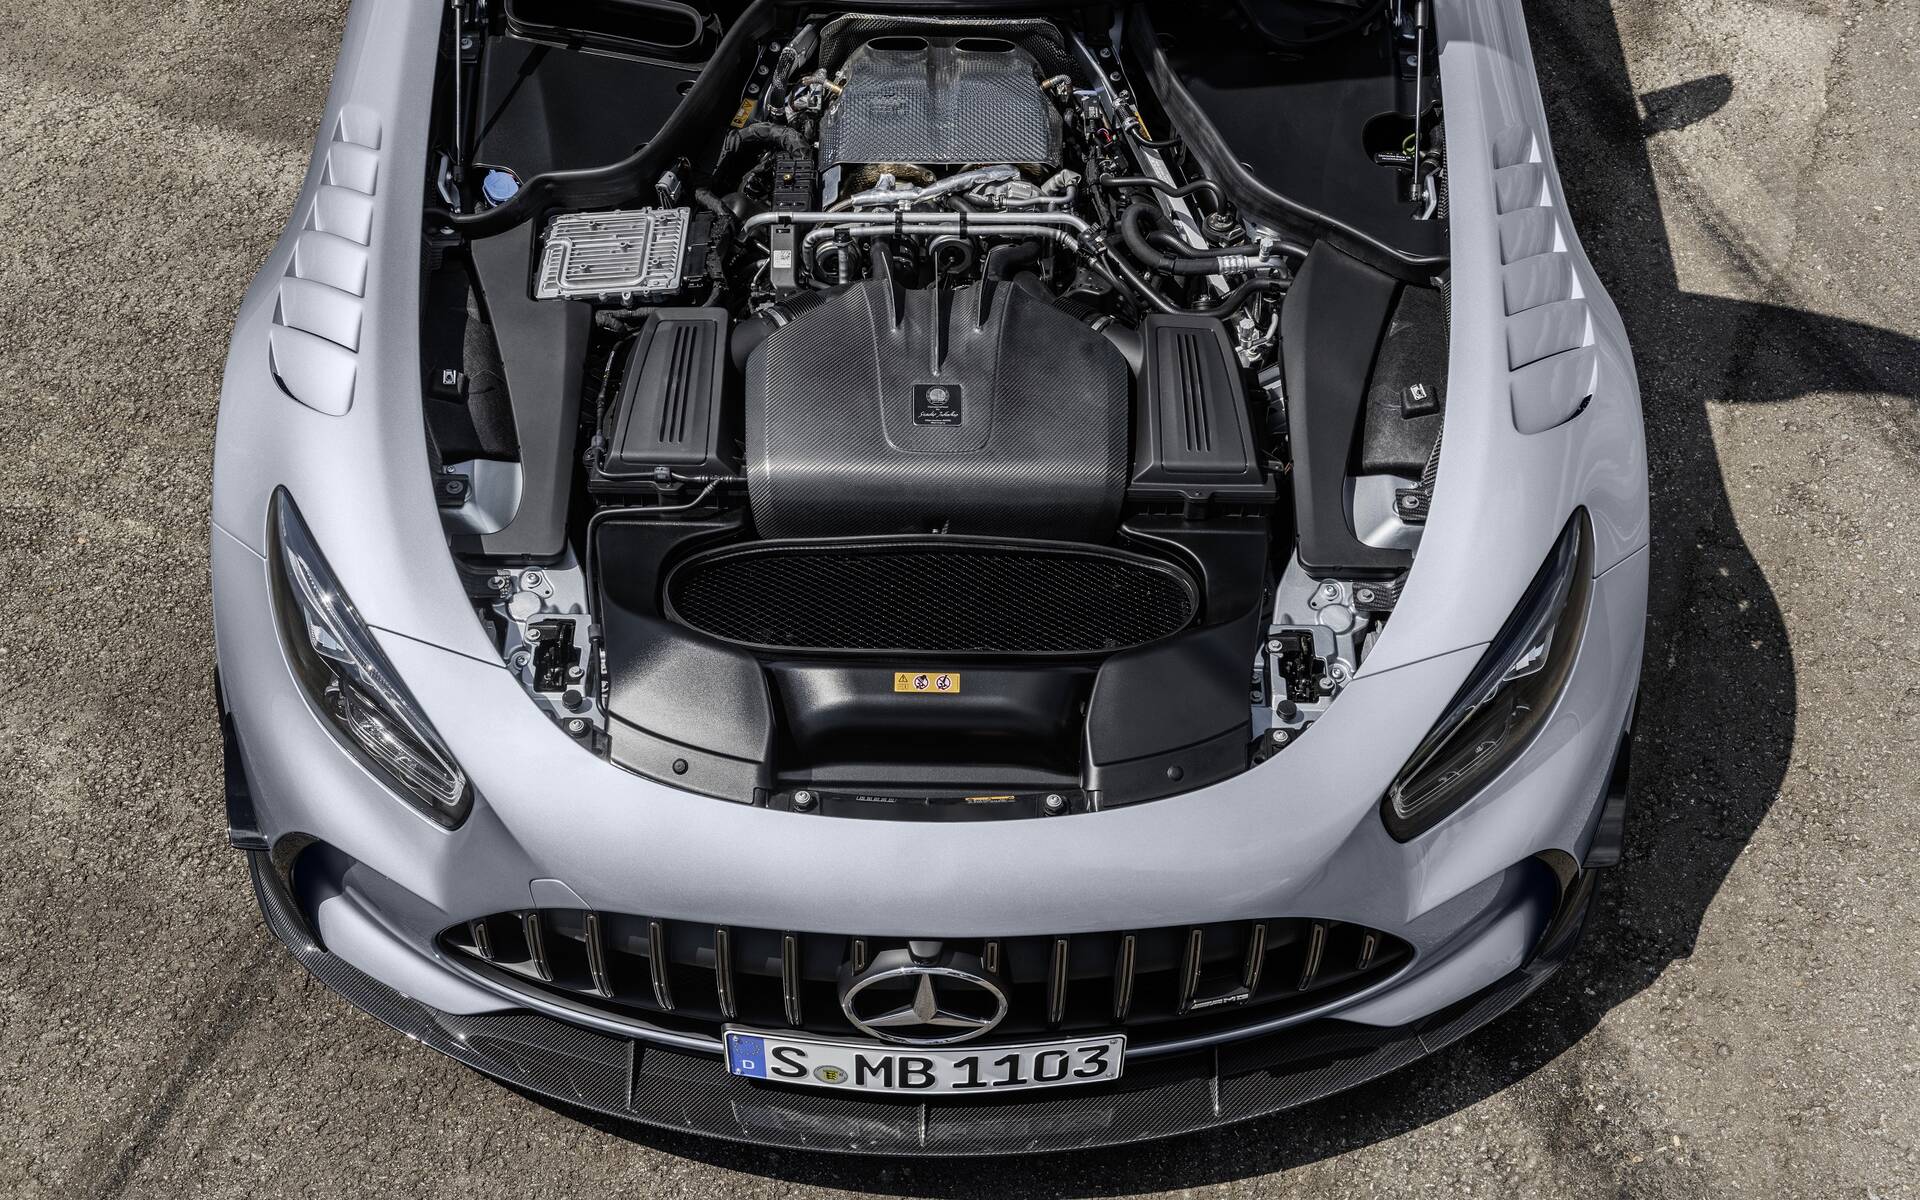 Mercedes-AMG GT Black Series Cranked up to 720 Horsepower - The Car